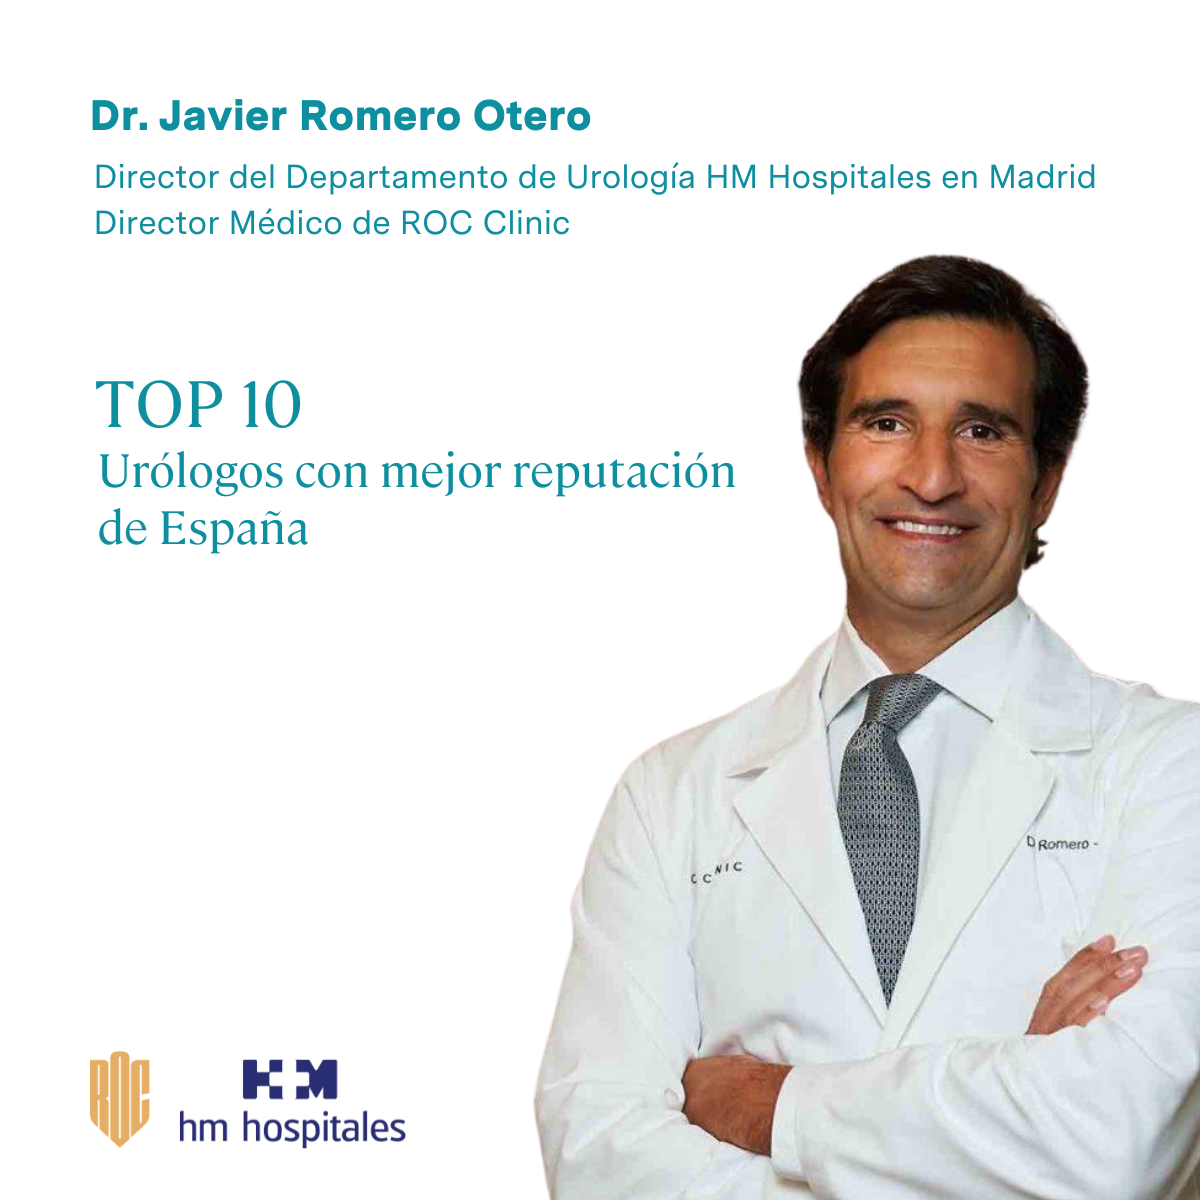 Dr. Javier Romero-Otero, 'Top 10' of the most reputable urologists